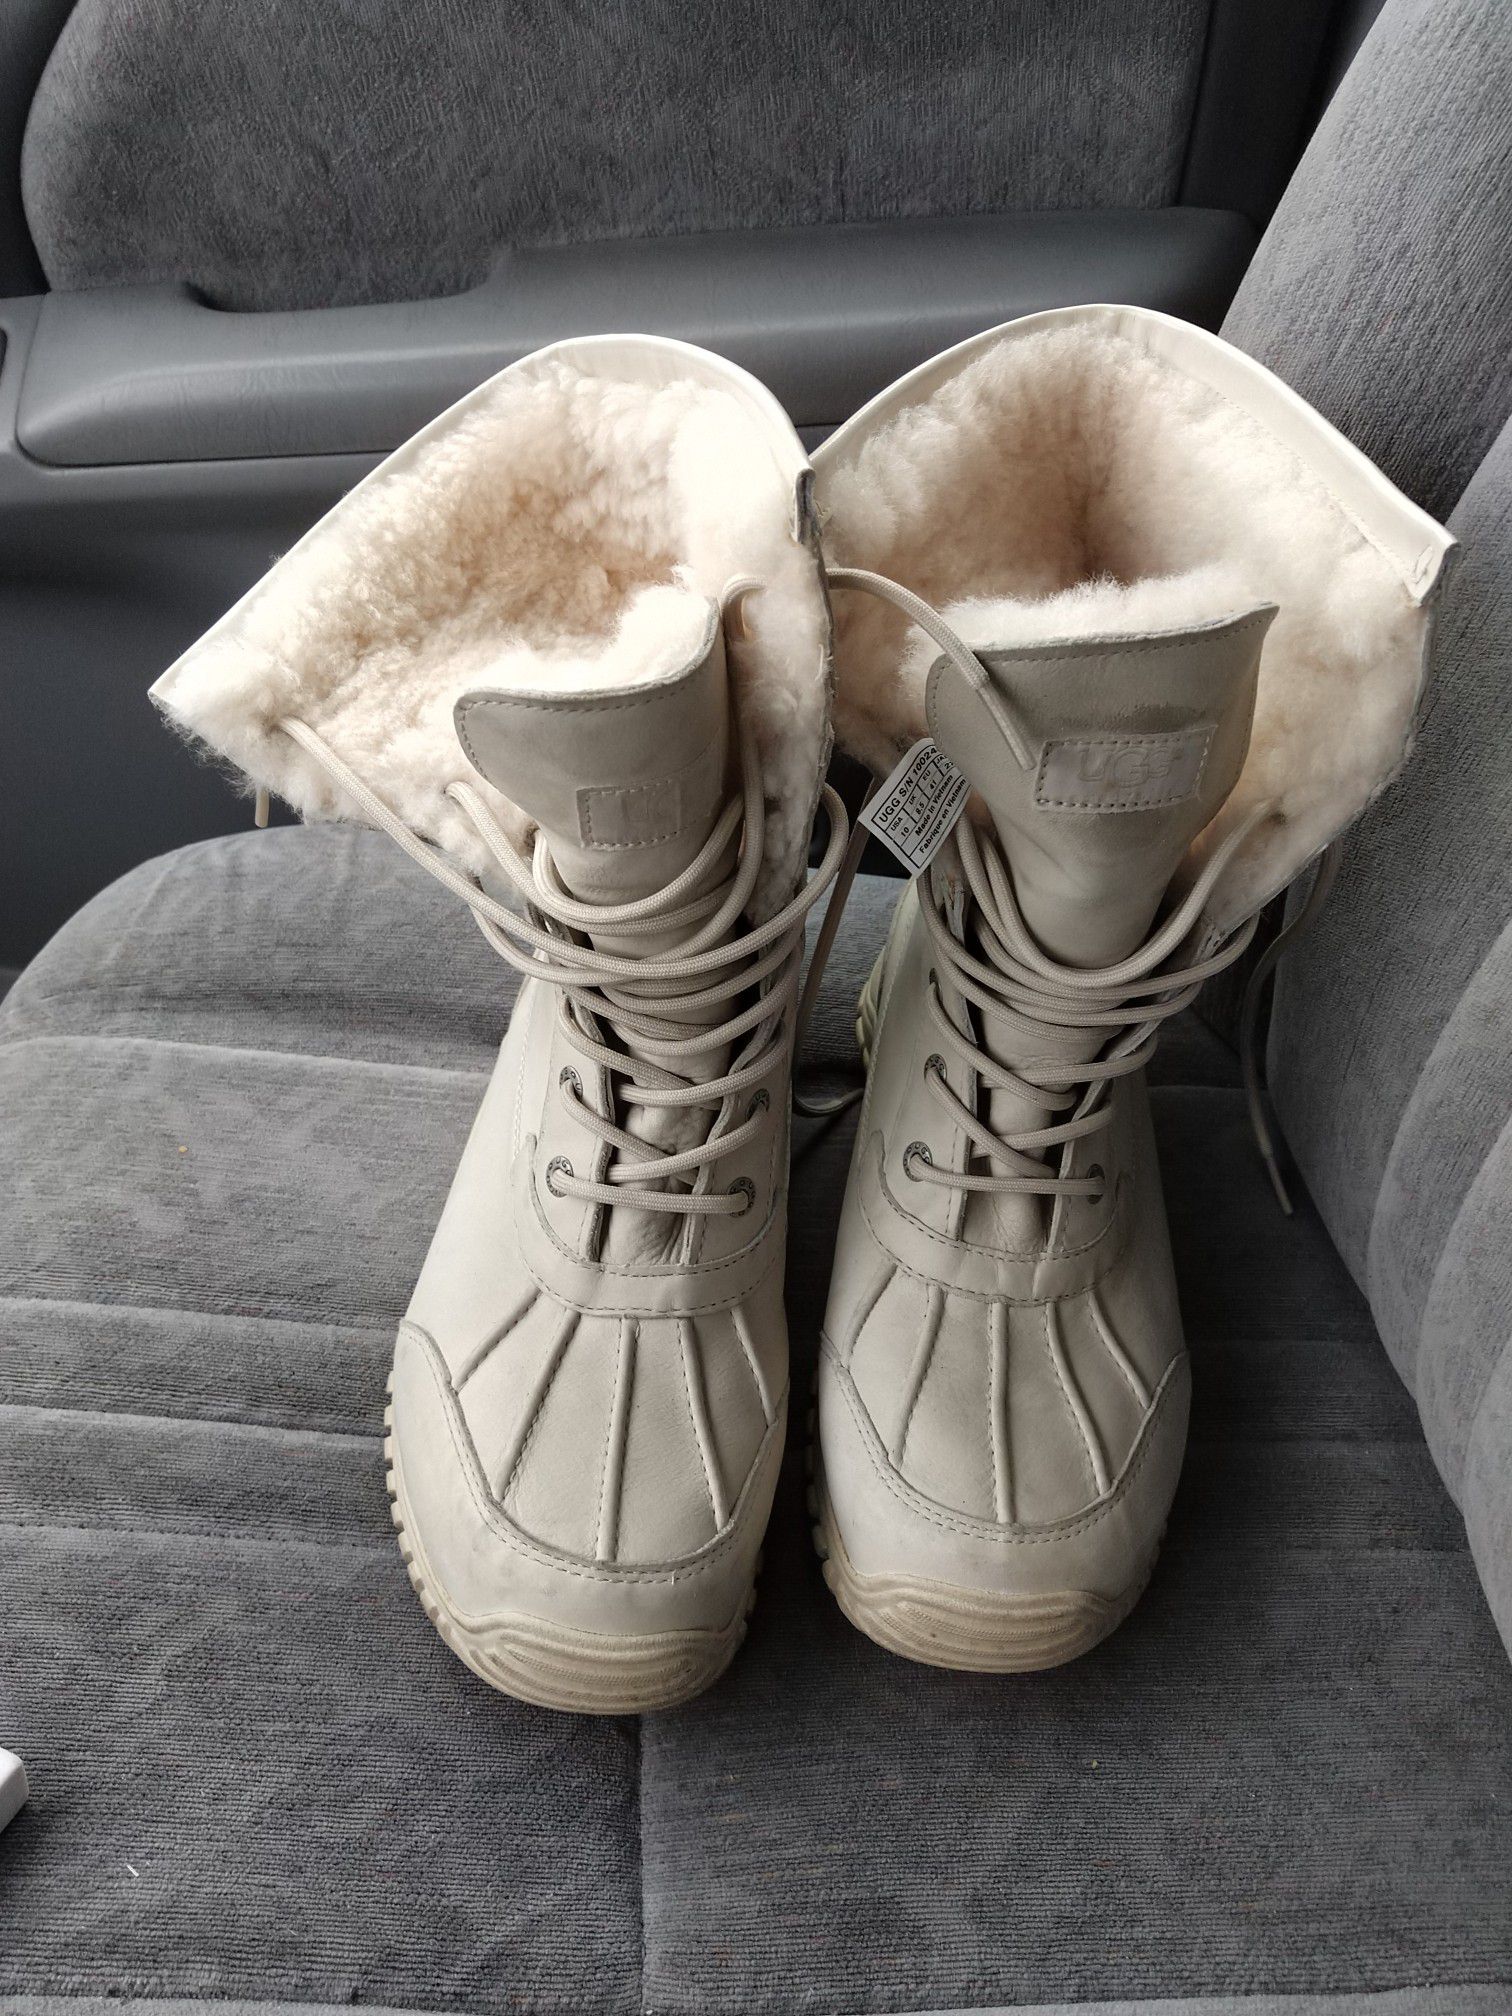 Ugg boots in good condition, for winter. The materials of leather and suede are bone color